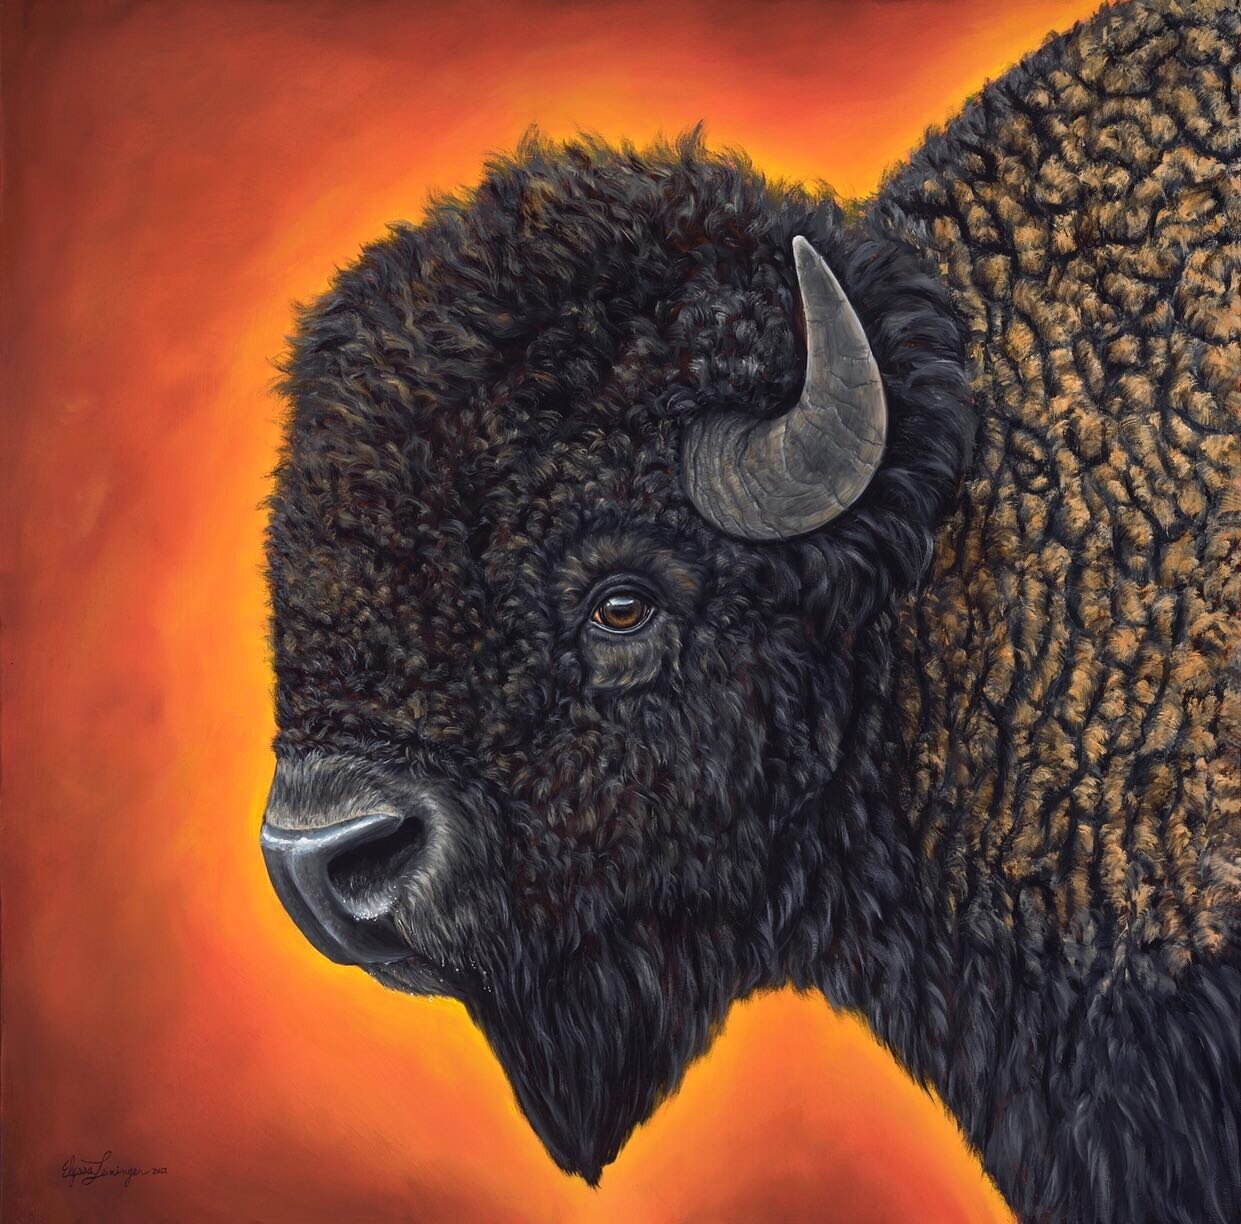 Bison are my favorite animals to paint because of all their hair! But the eye is still my favorite part to paint. Like the other pieces in my bull series, the eye is in the exact center of the canvas and was painted first to keep the eye the focal po